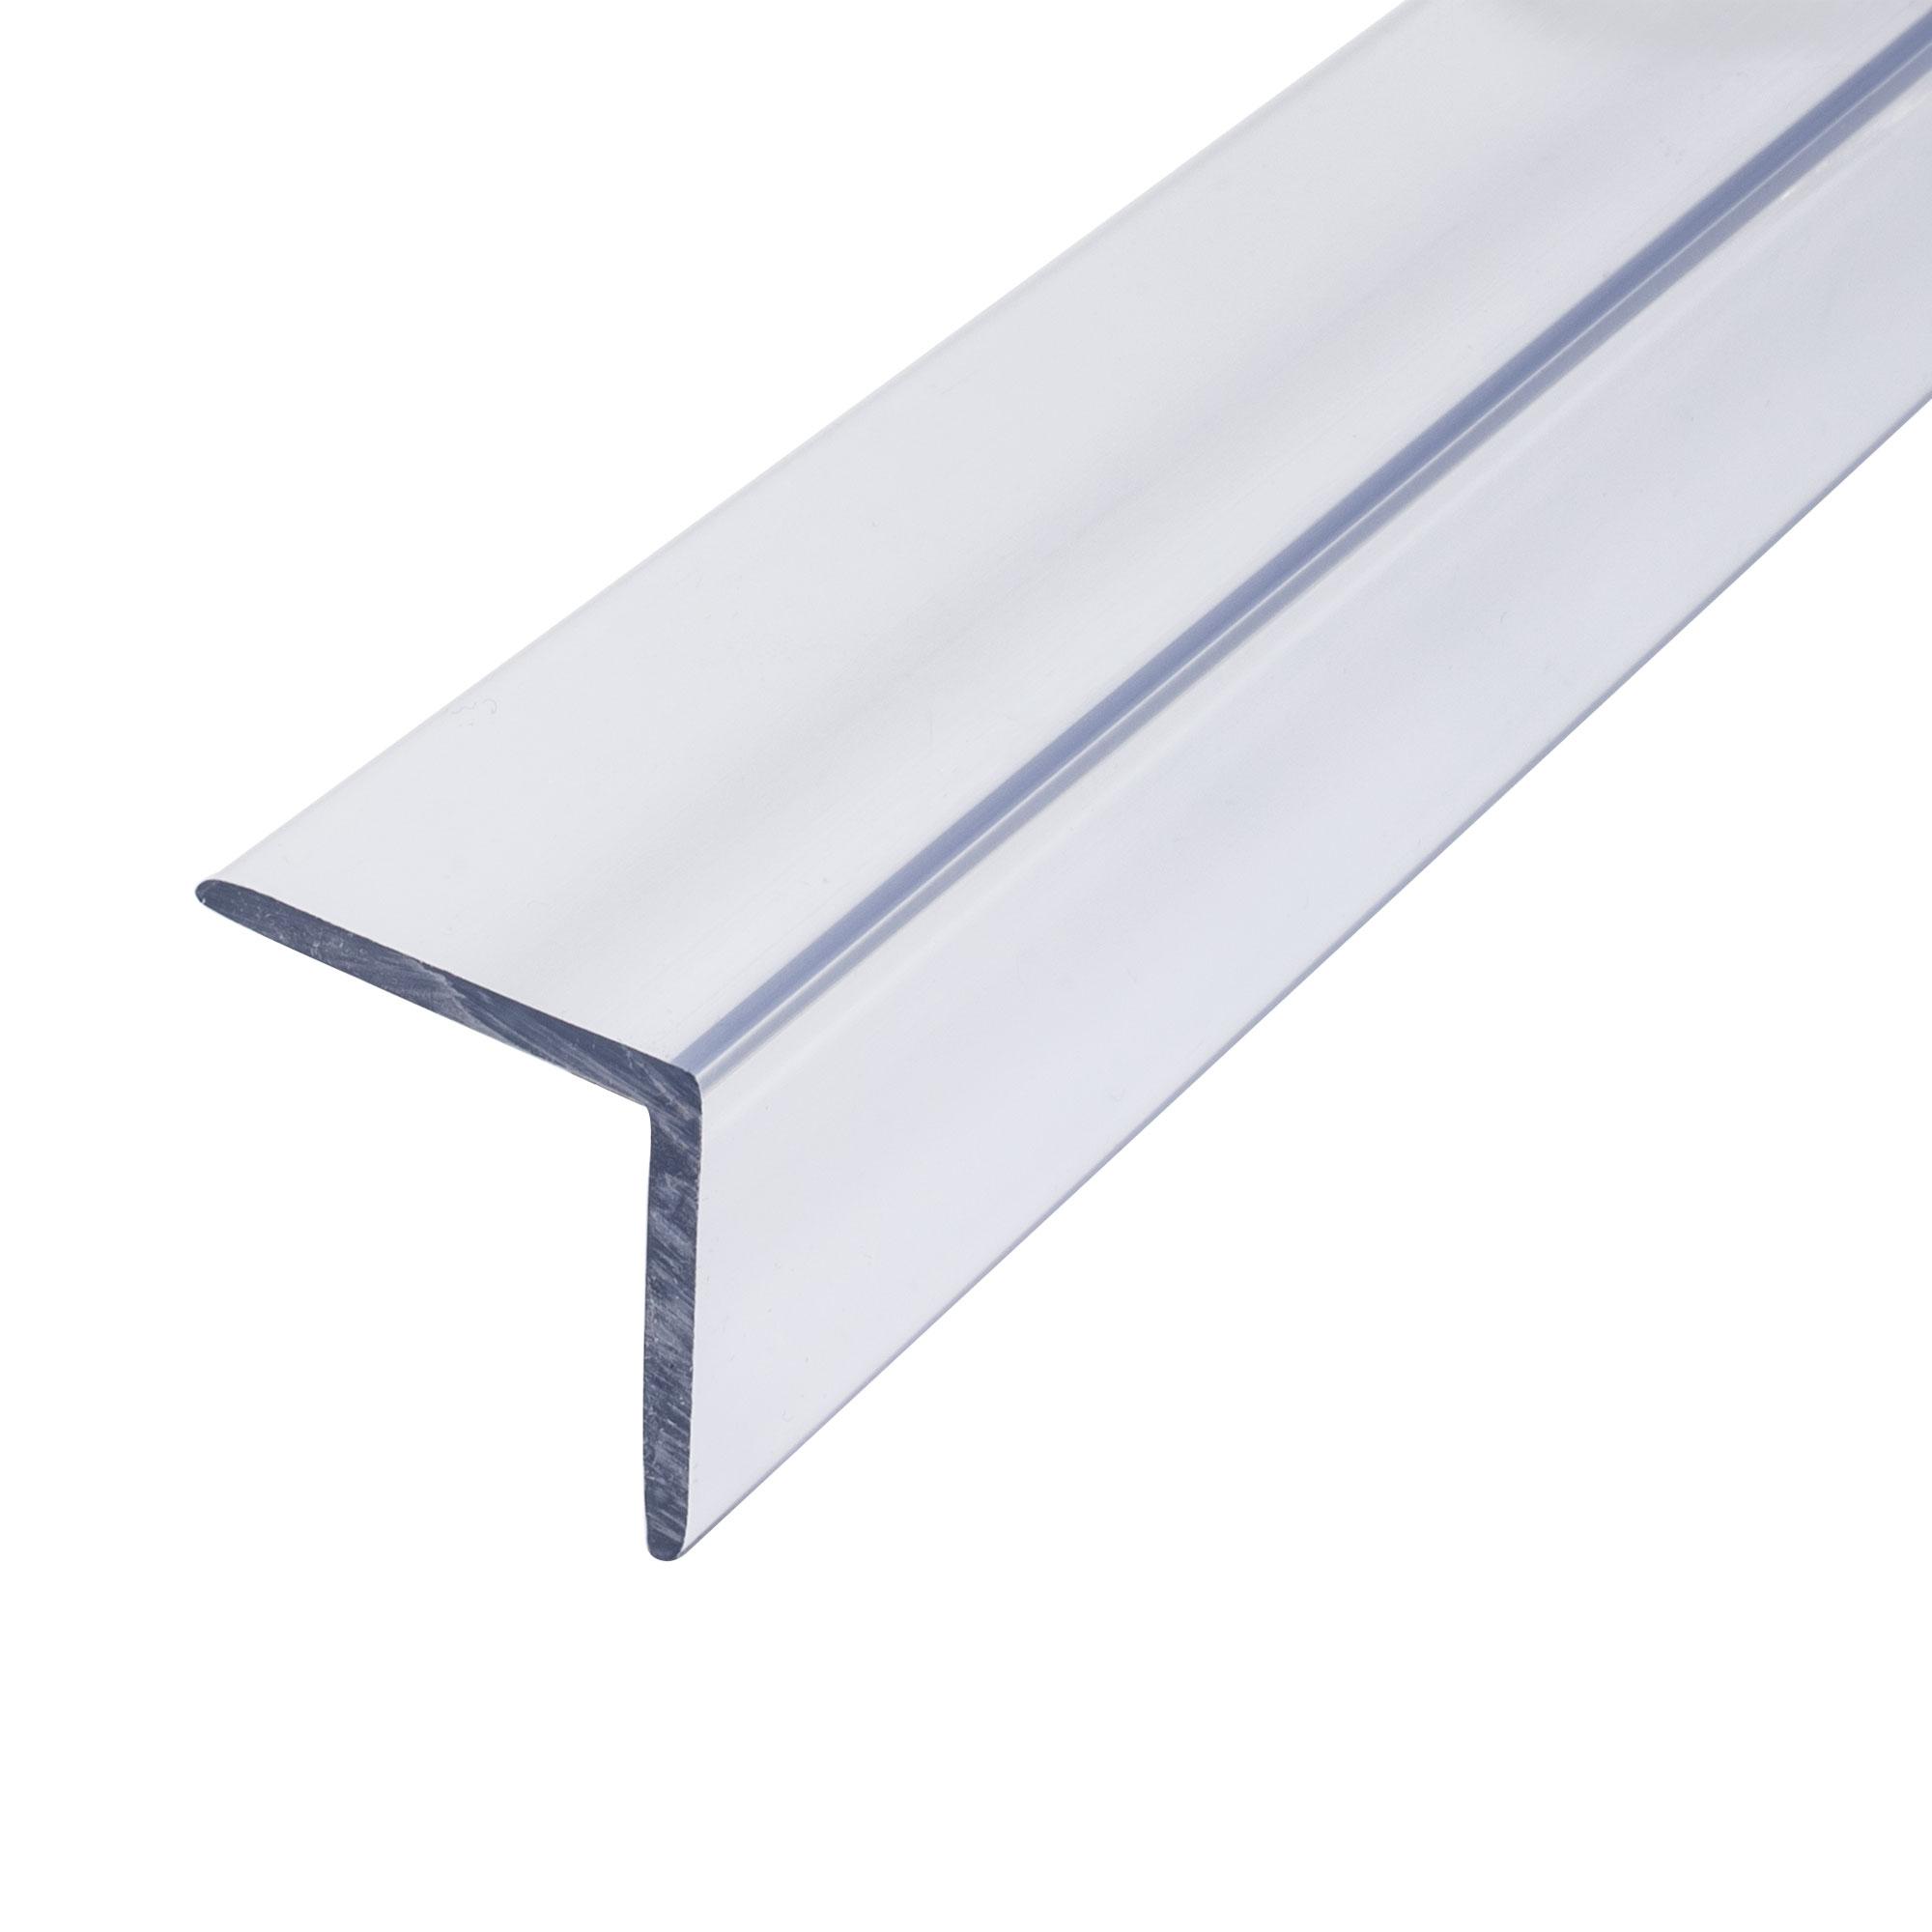 Outwater Plastics 1750-CL Butyrate 1-1/4 Inch X 1-1/4 Inch X 7/64 (.109) Inch Thick Clear Plastic Even Leg Angle Moulding 36 Inch Lengths (Pack of 4) - image 4 of 5